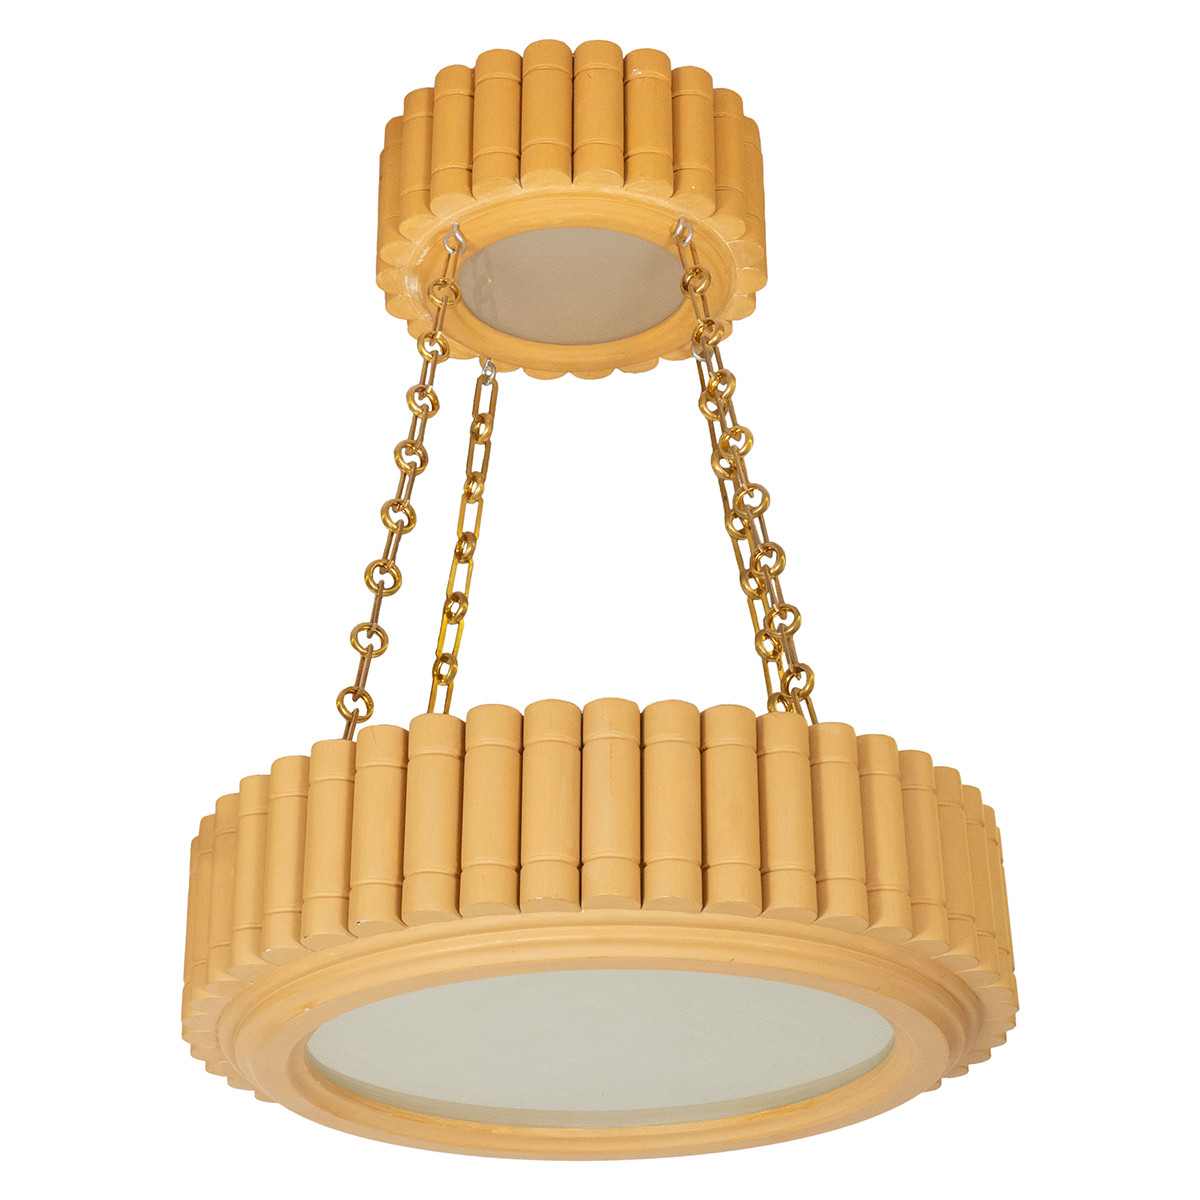 Two-tier round giltwood pendant by Carlos Villegas